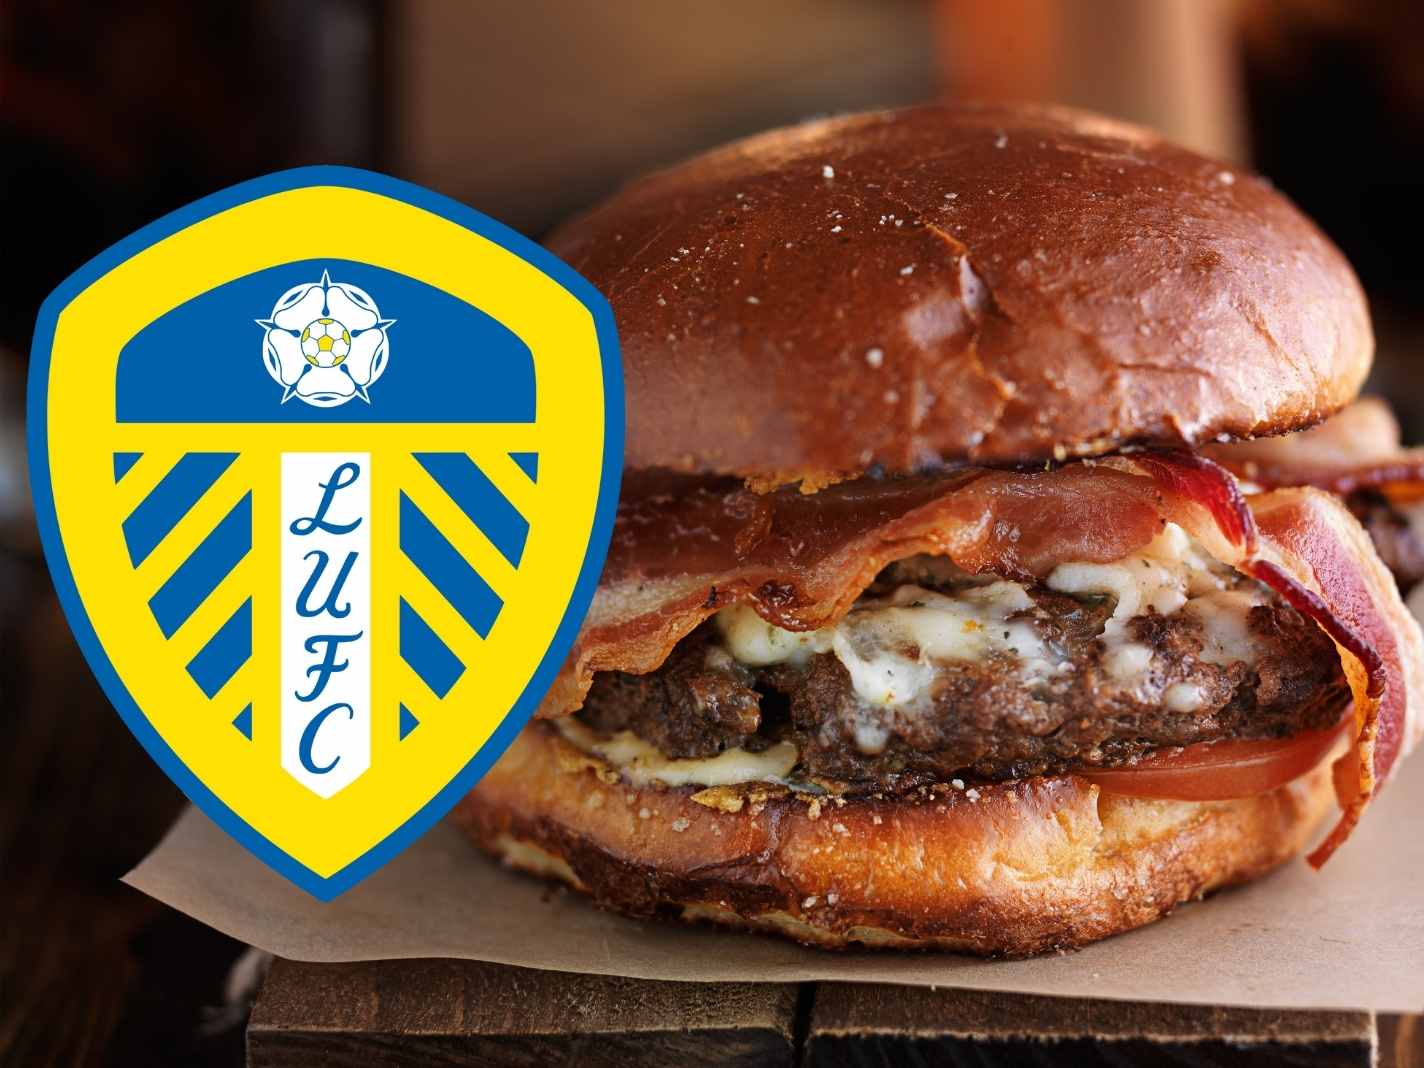 Leeds United are under fire for selling an overly burned cheeseburger at Elland Road